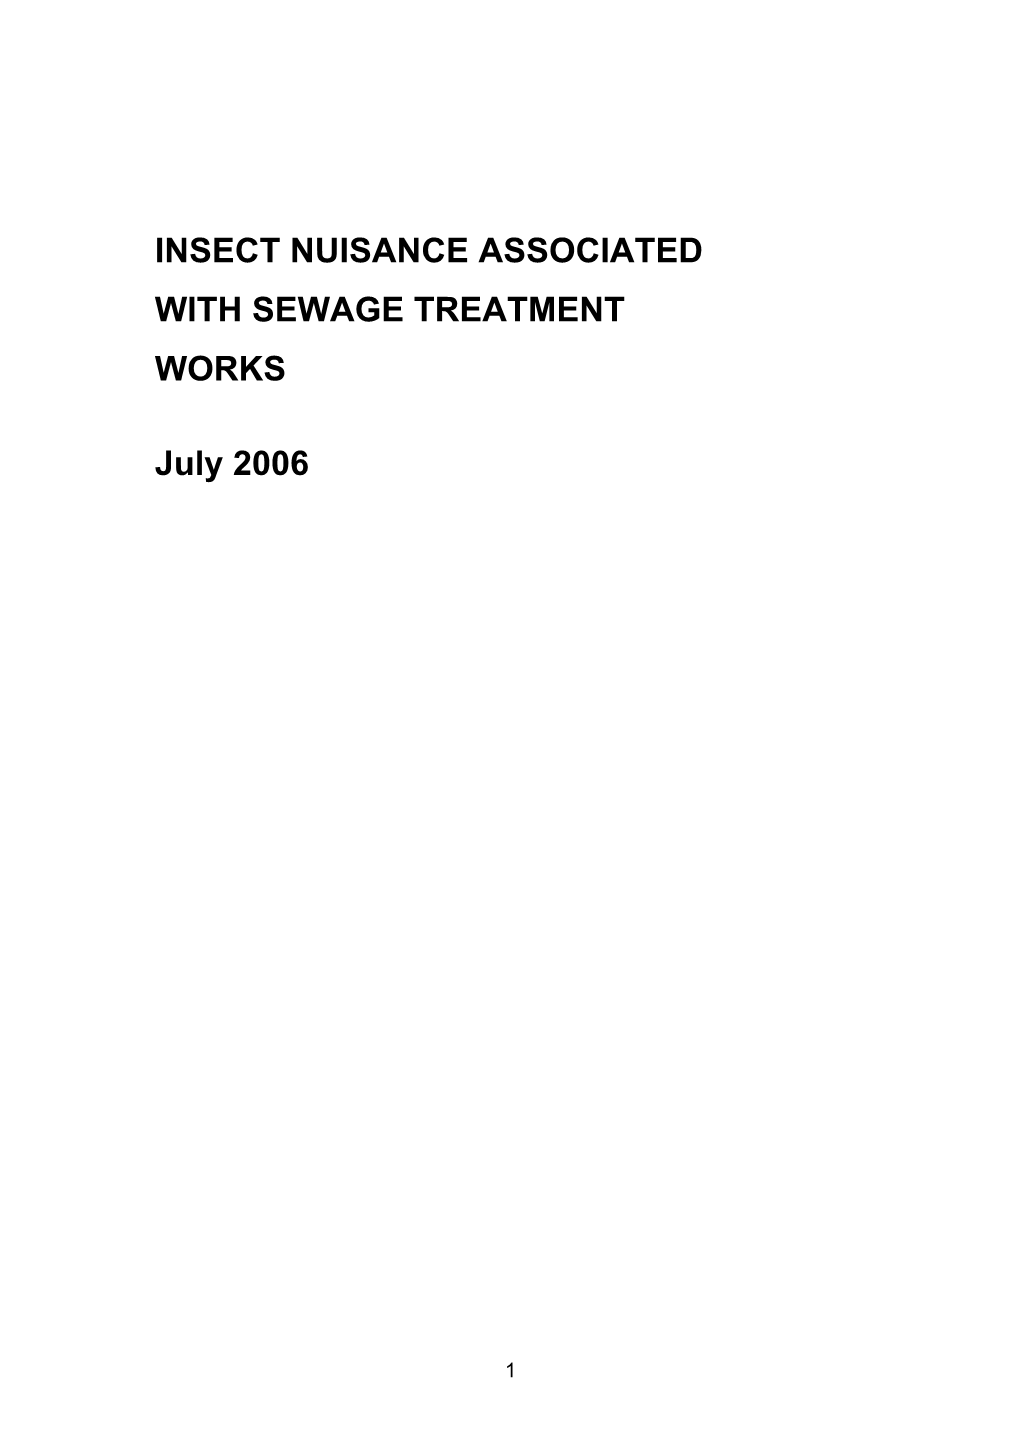 Insect Nuisance Associated with Sewage Treatment Works